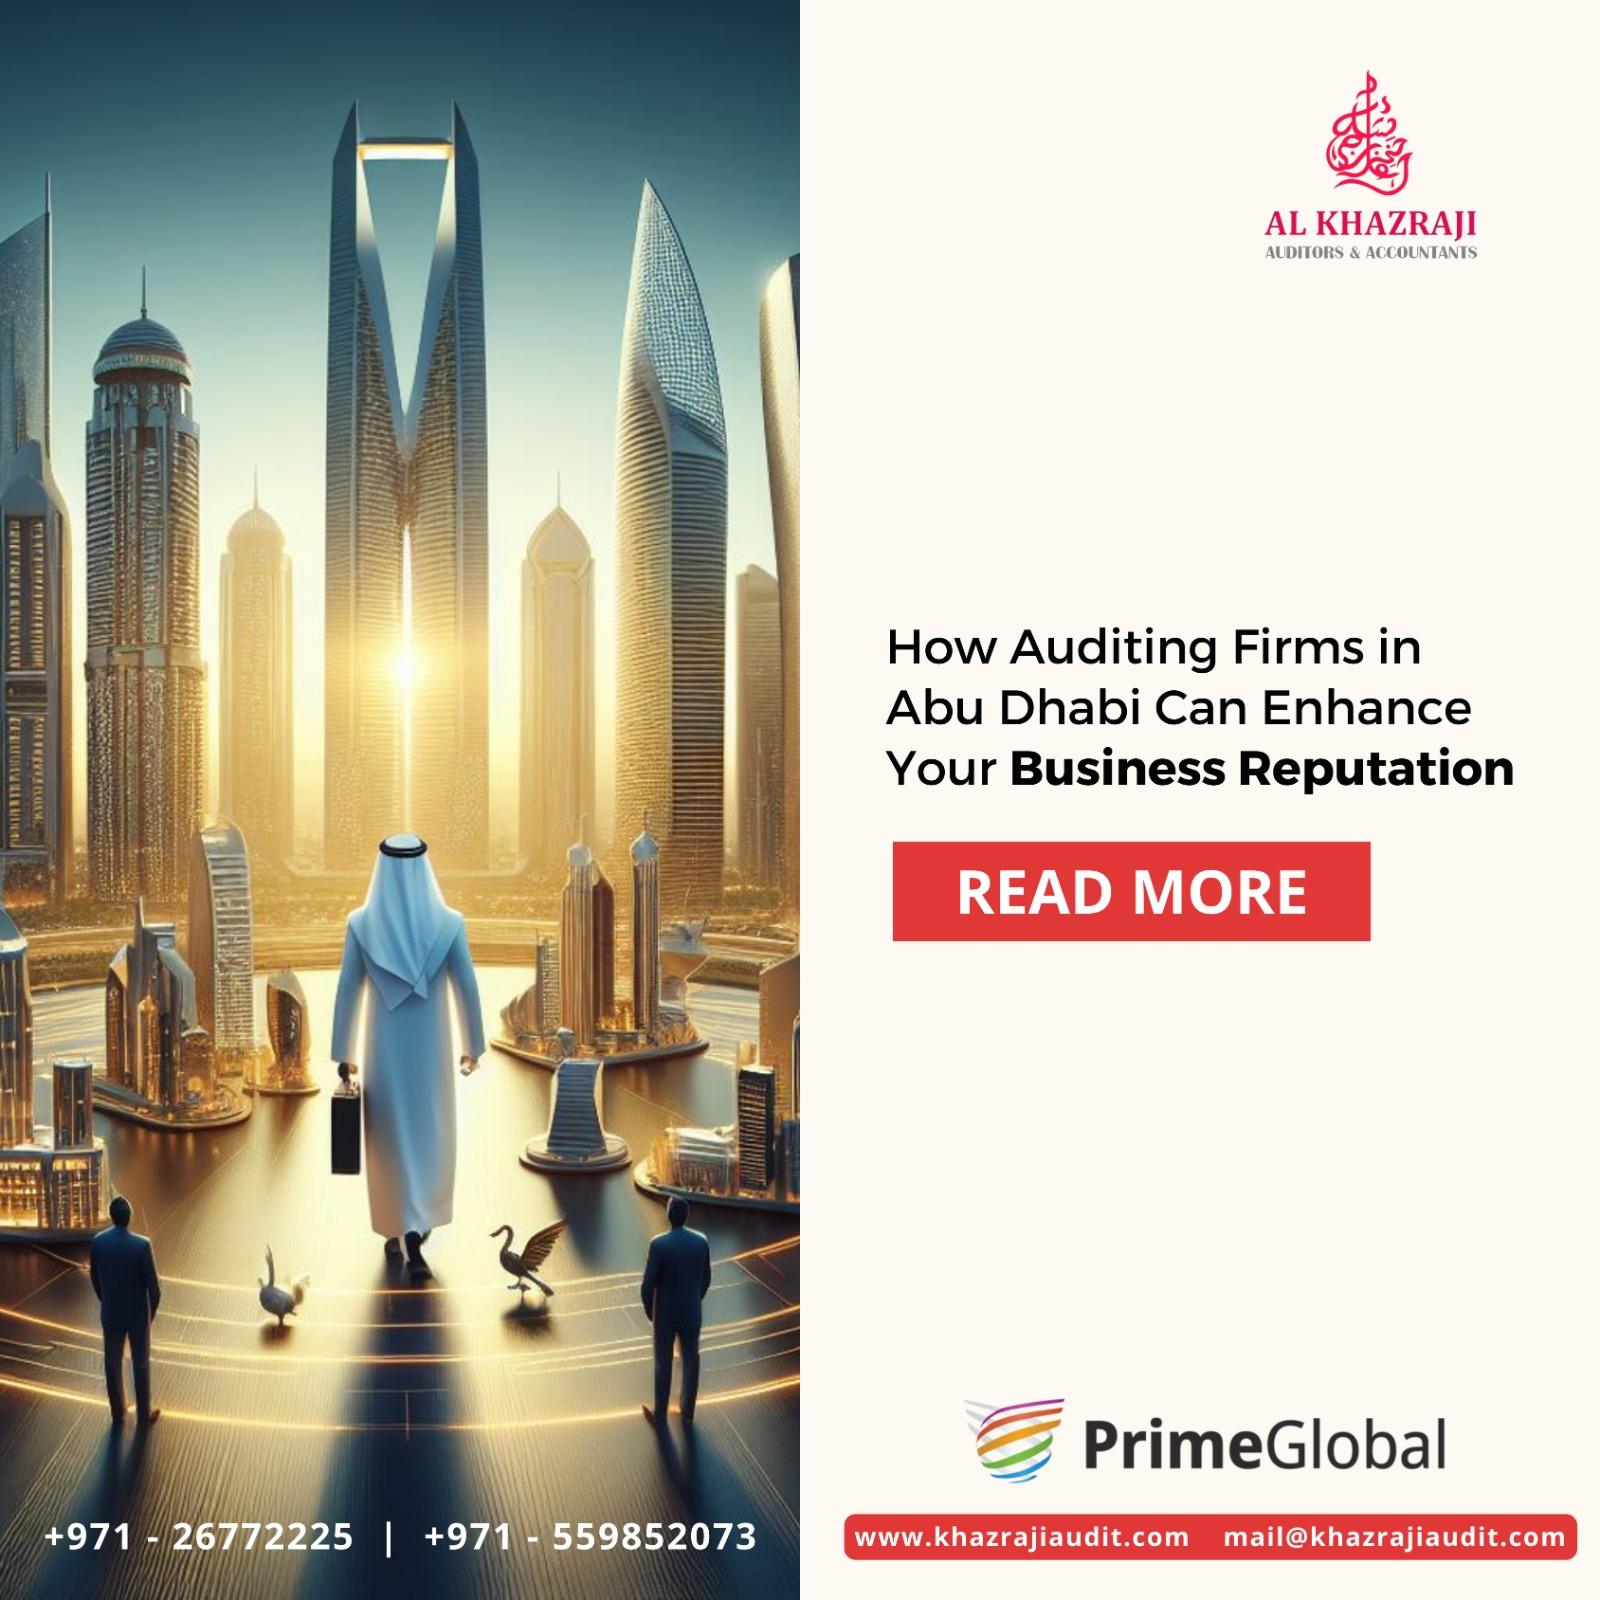 How Auditing Firms in Abu Dhabi Can Enhance Your Business